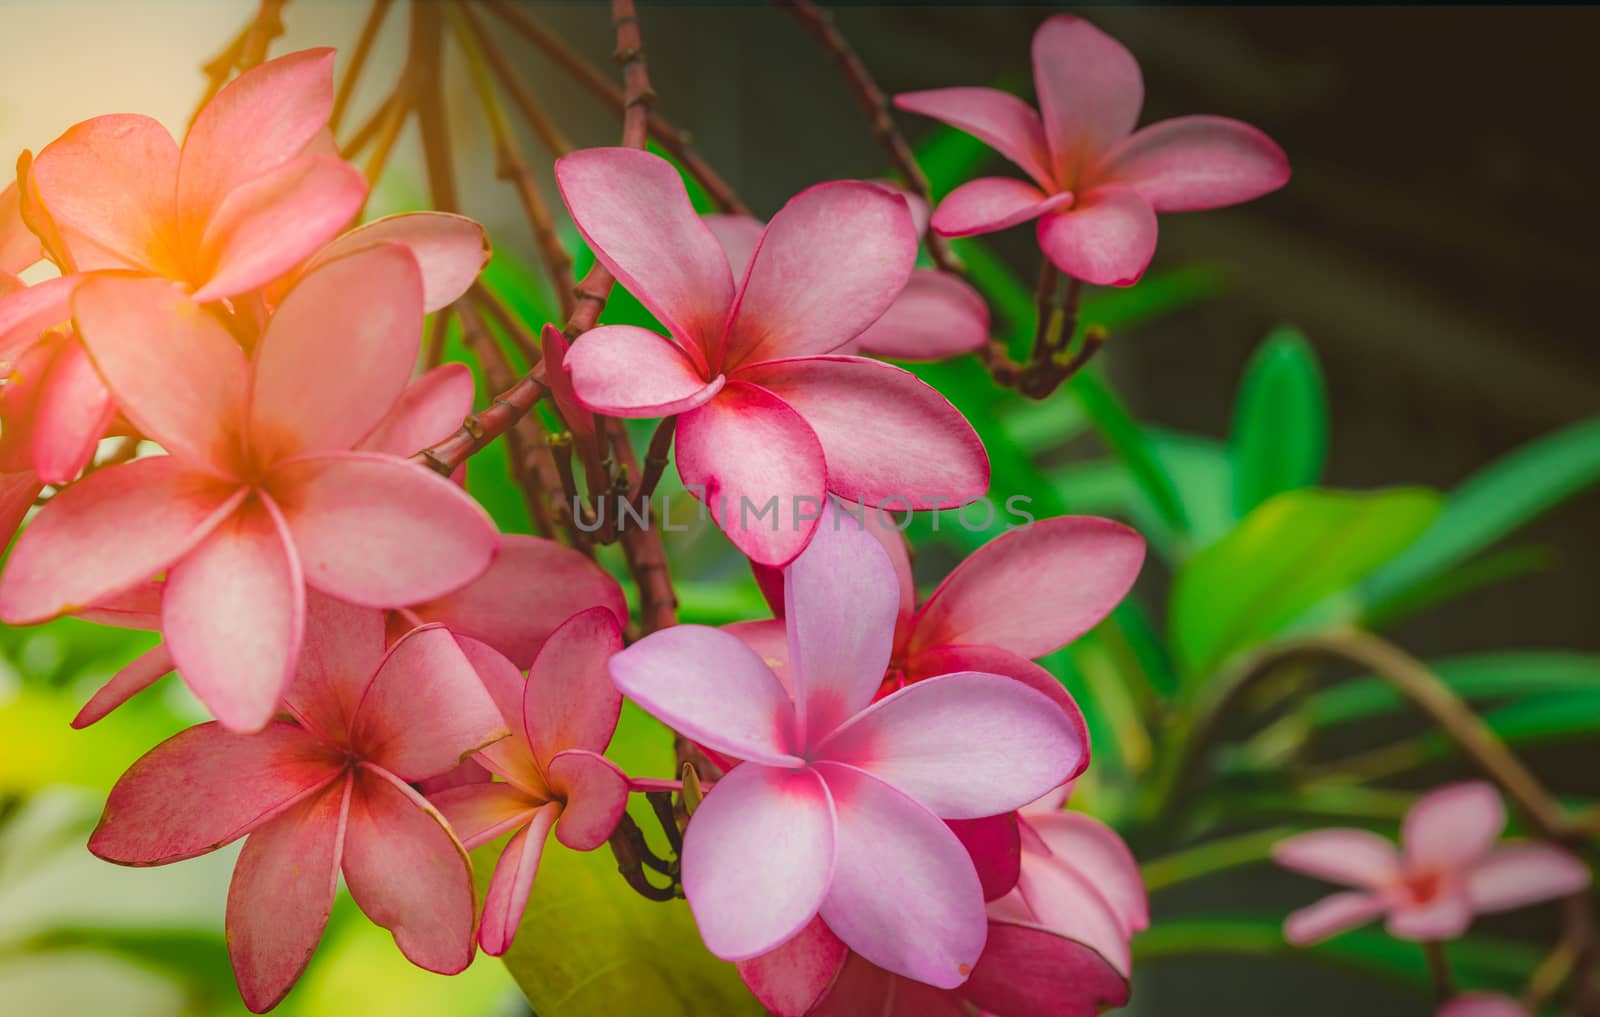 Frangipani flower (Plumeria alba) with green leaves on blurred background. Pink flowers. Health and spa background. Summer spa concept. Relax emotion. Pink flower blooming in tropical garden. 